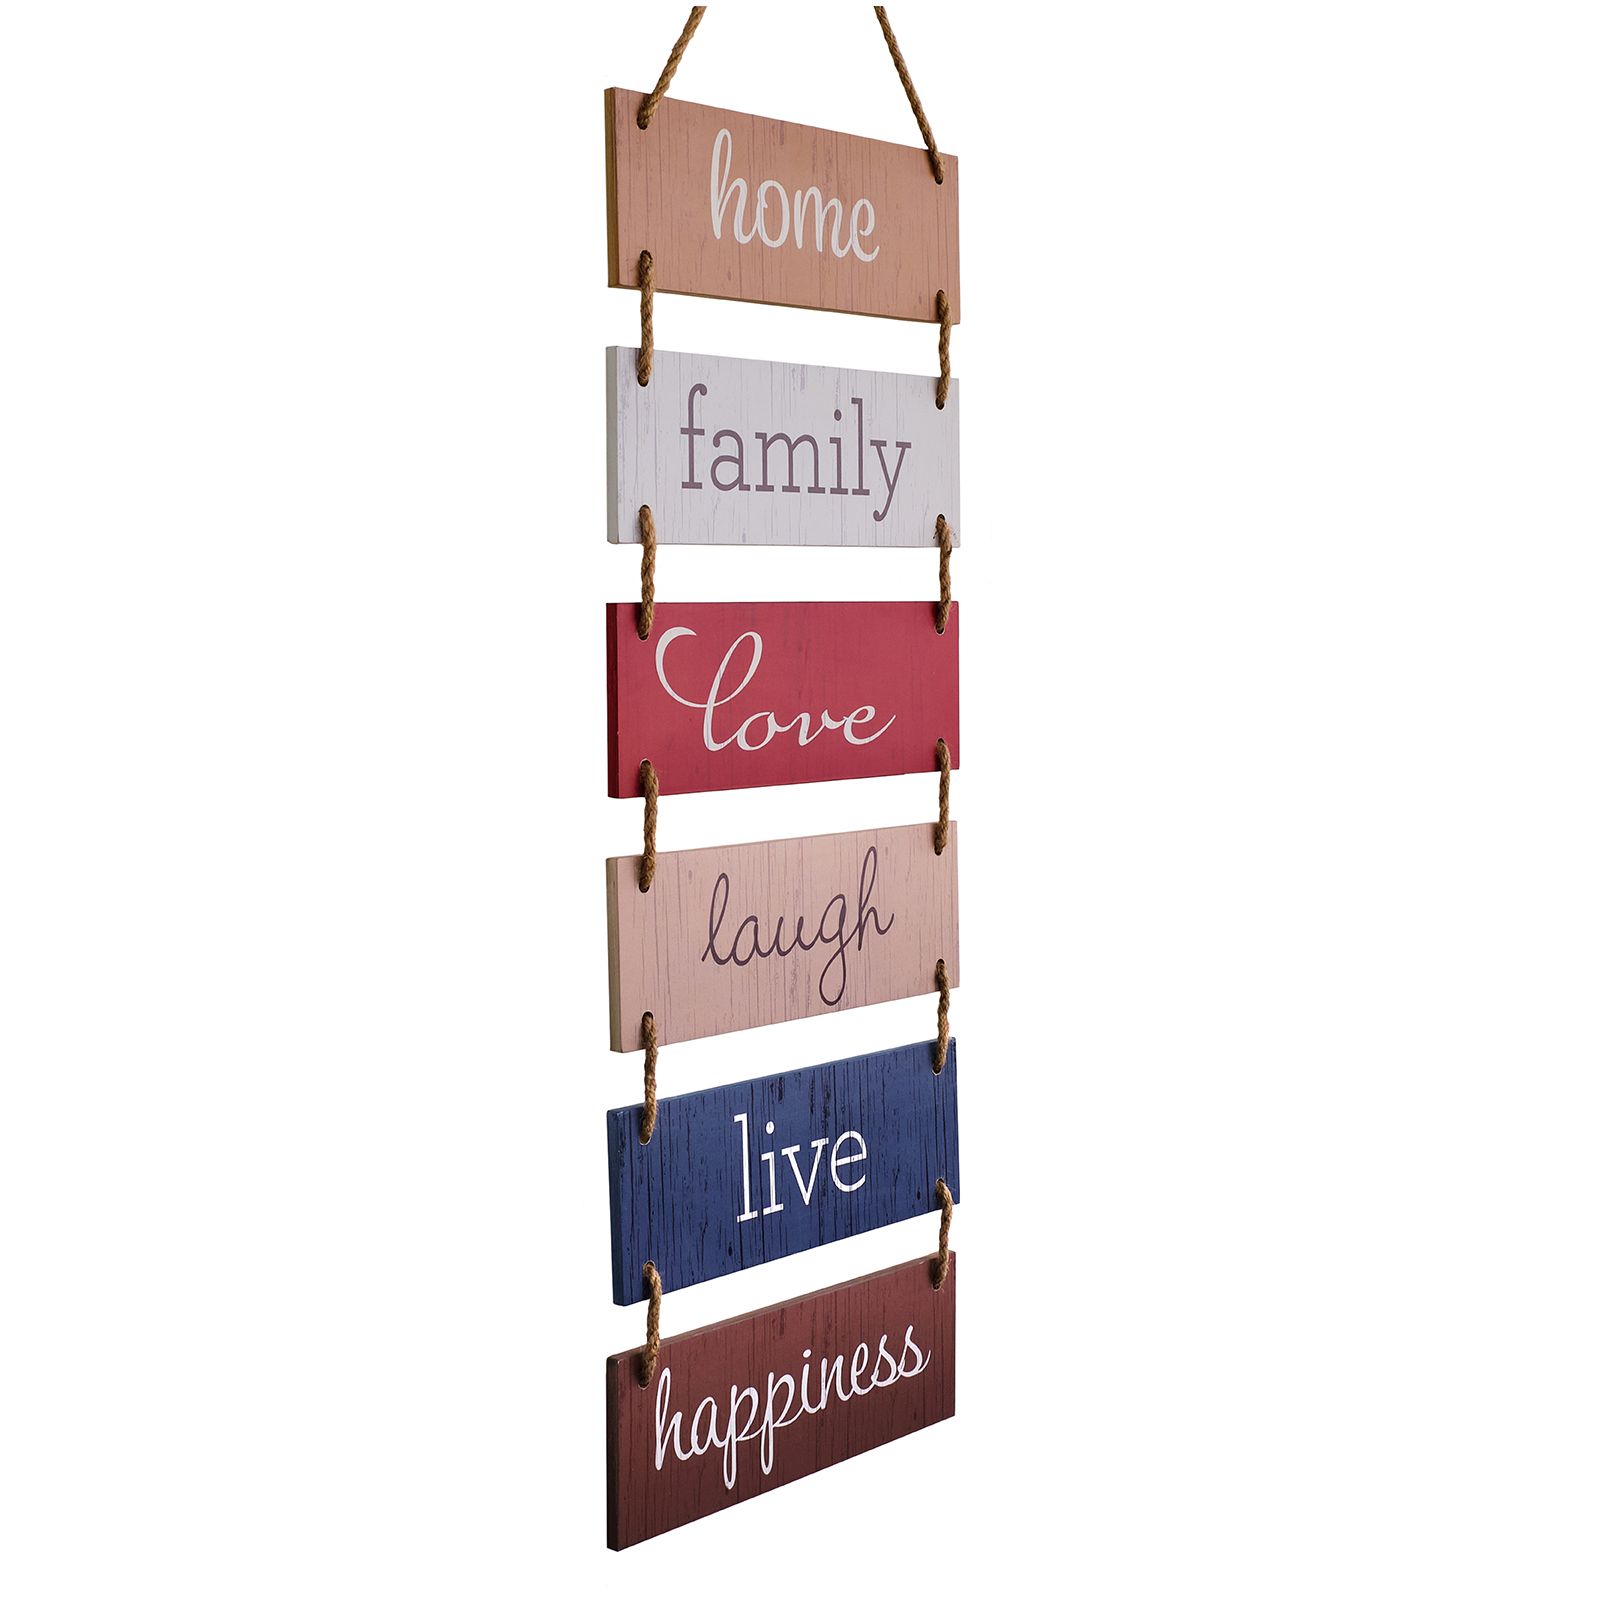 Large Hanging Wall Sign 11.75" x 32" Rustic Wooden Decor Blessed Theme 